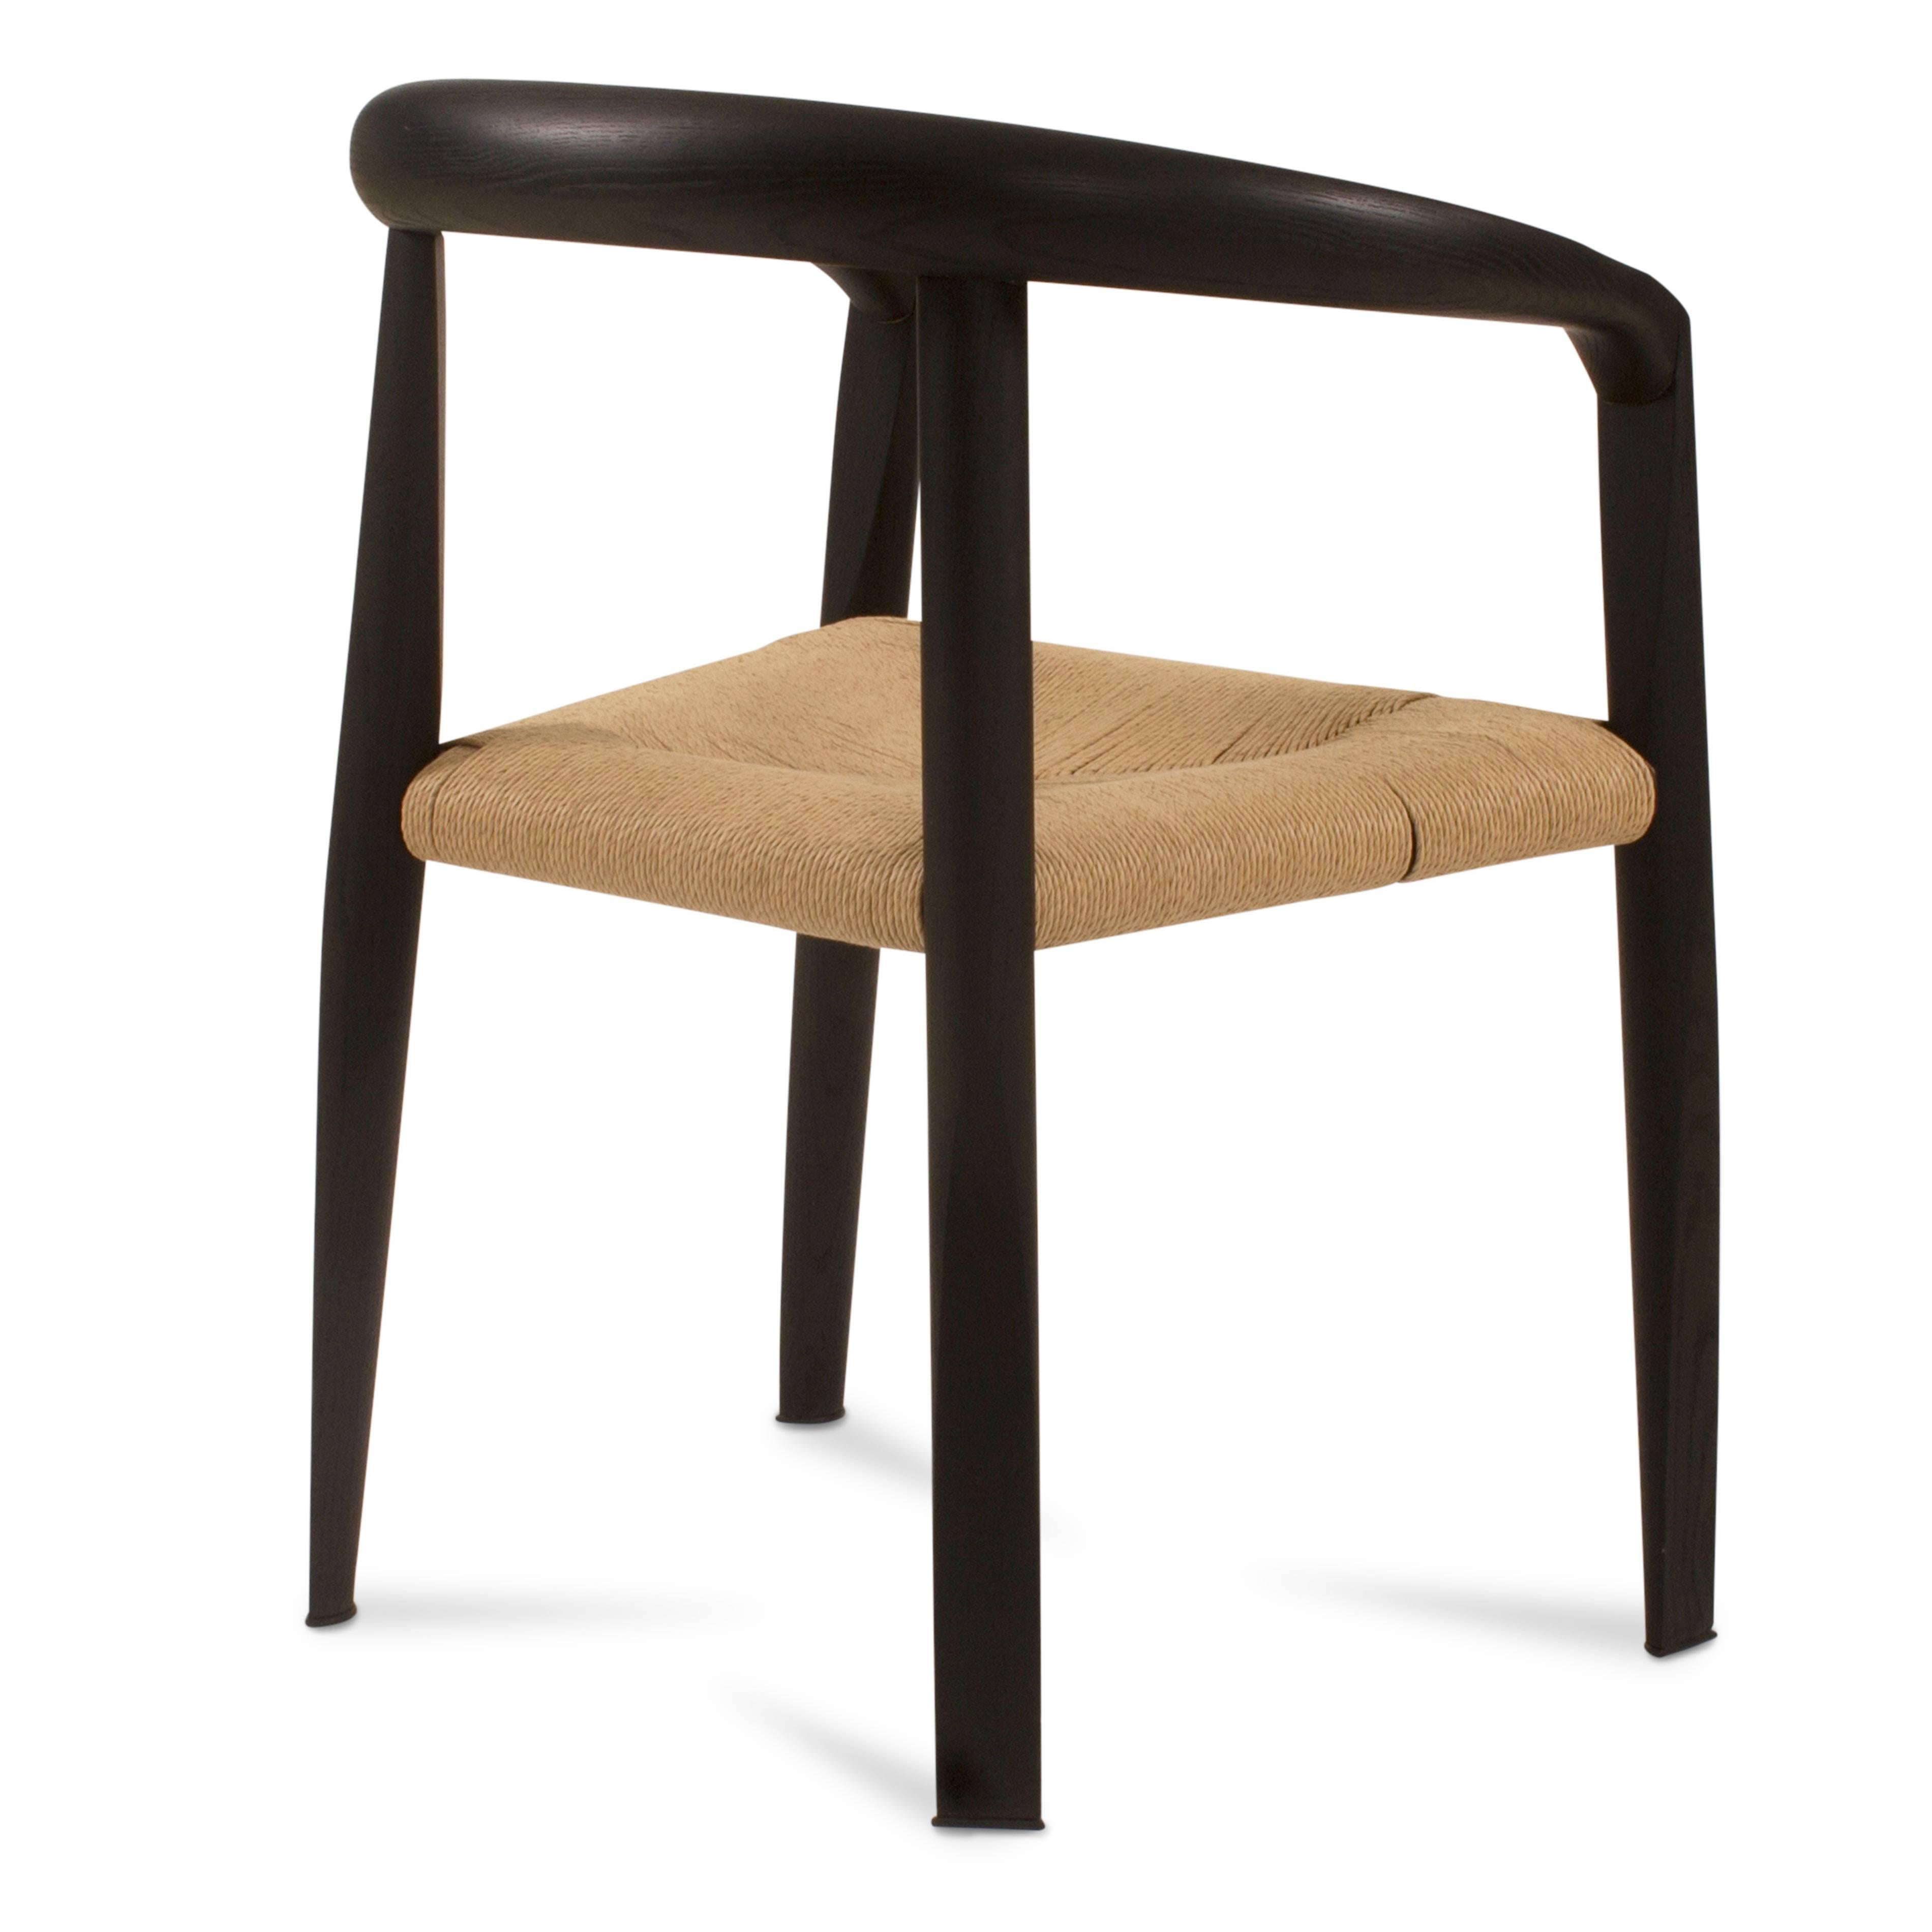 Italian Black Miss Dining Chair with Wicker Seat by Tobia Scarpa for Molteni, Italy